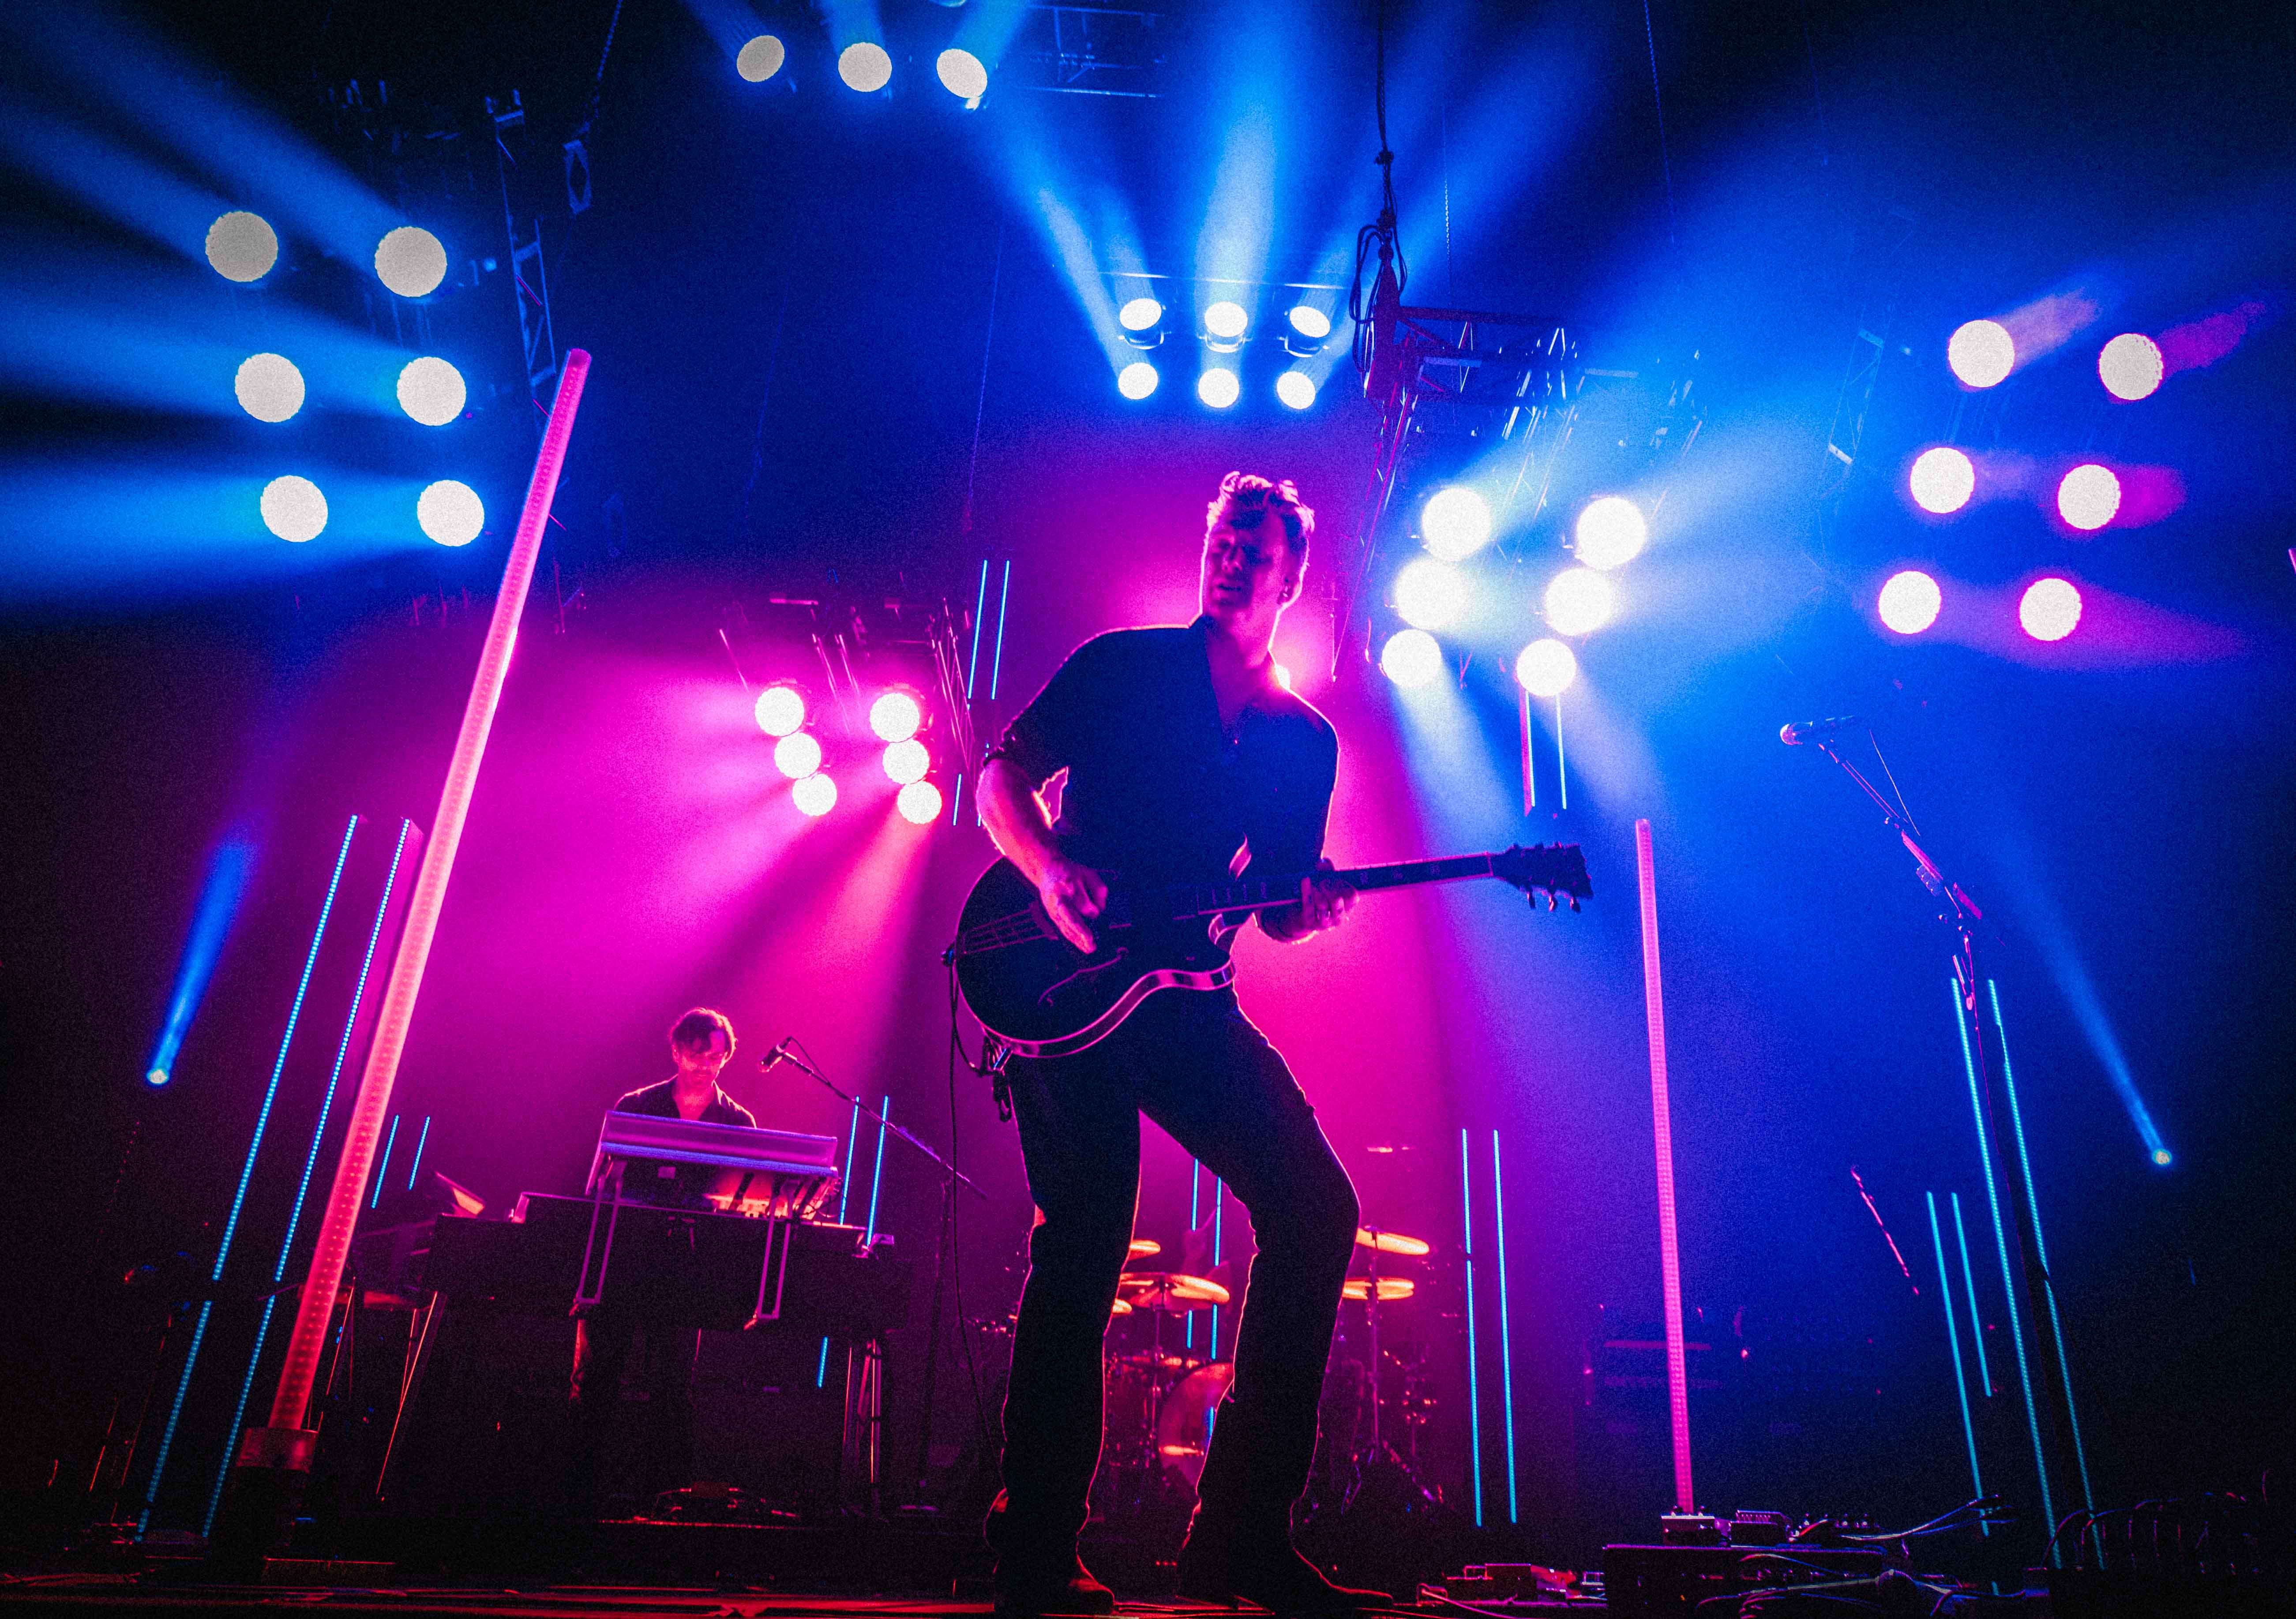 Queens of the Stone Age & triple j’s One Night Stand raise funds in Tasmania